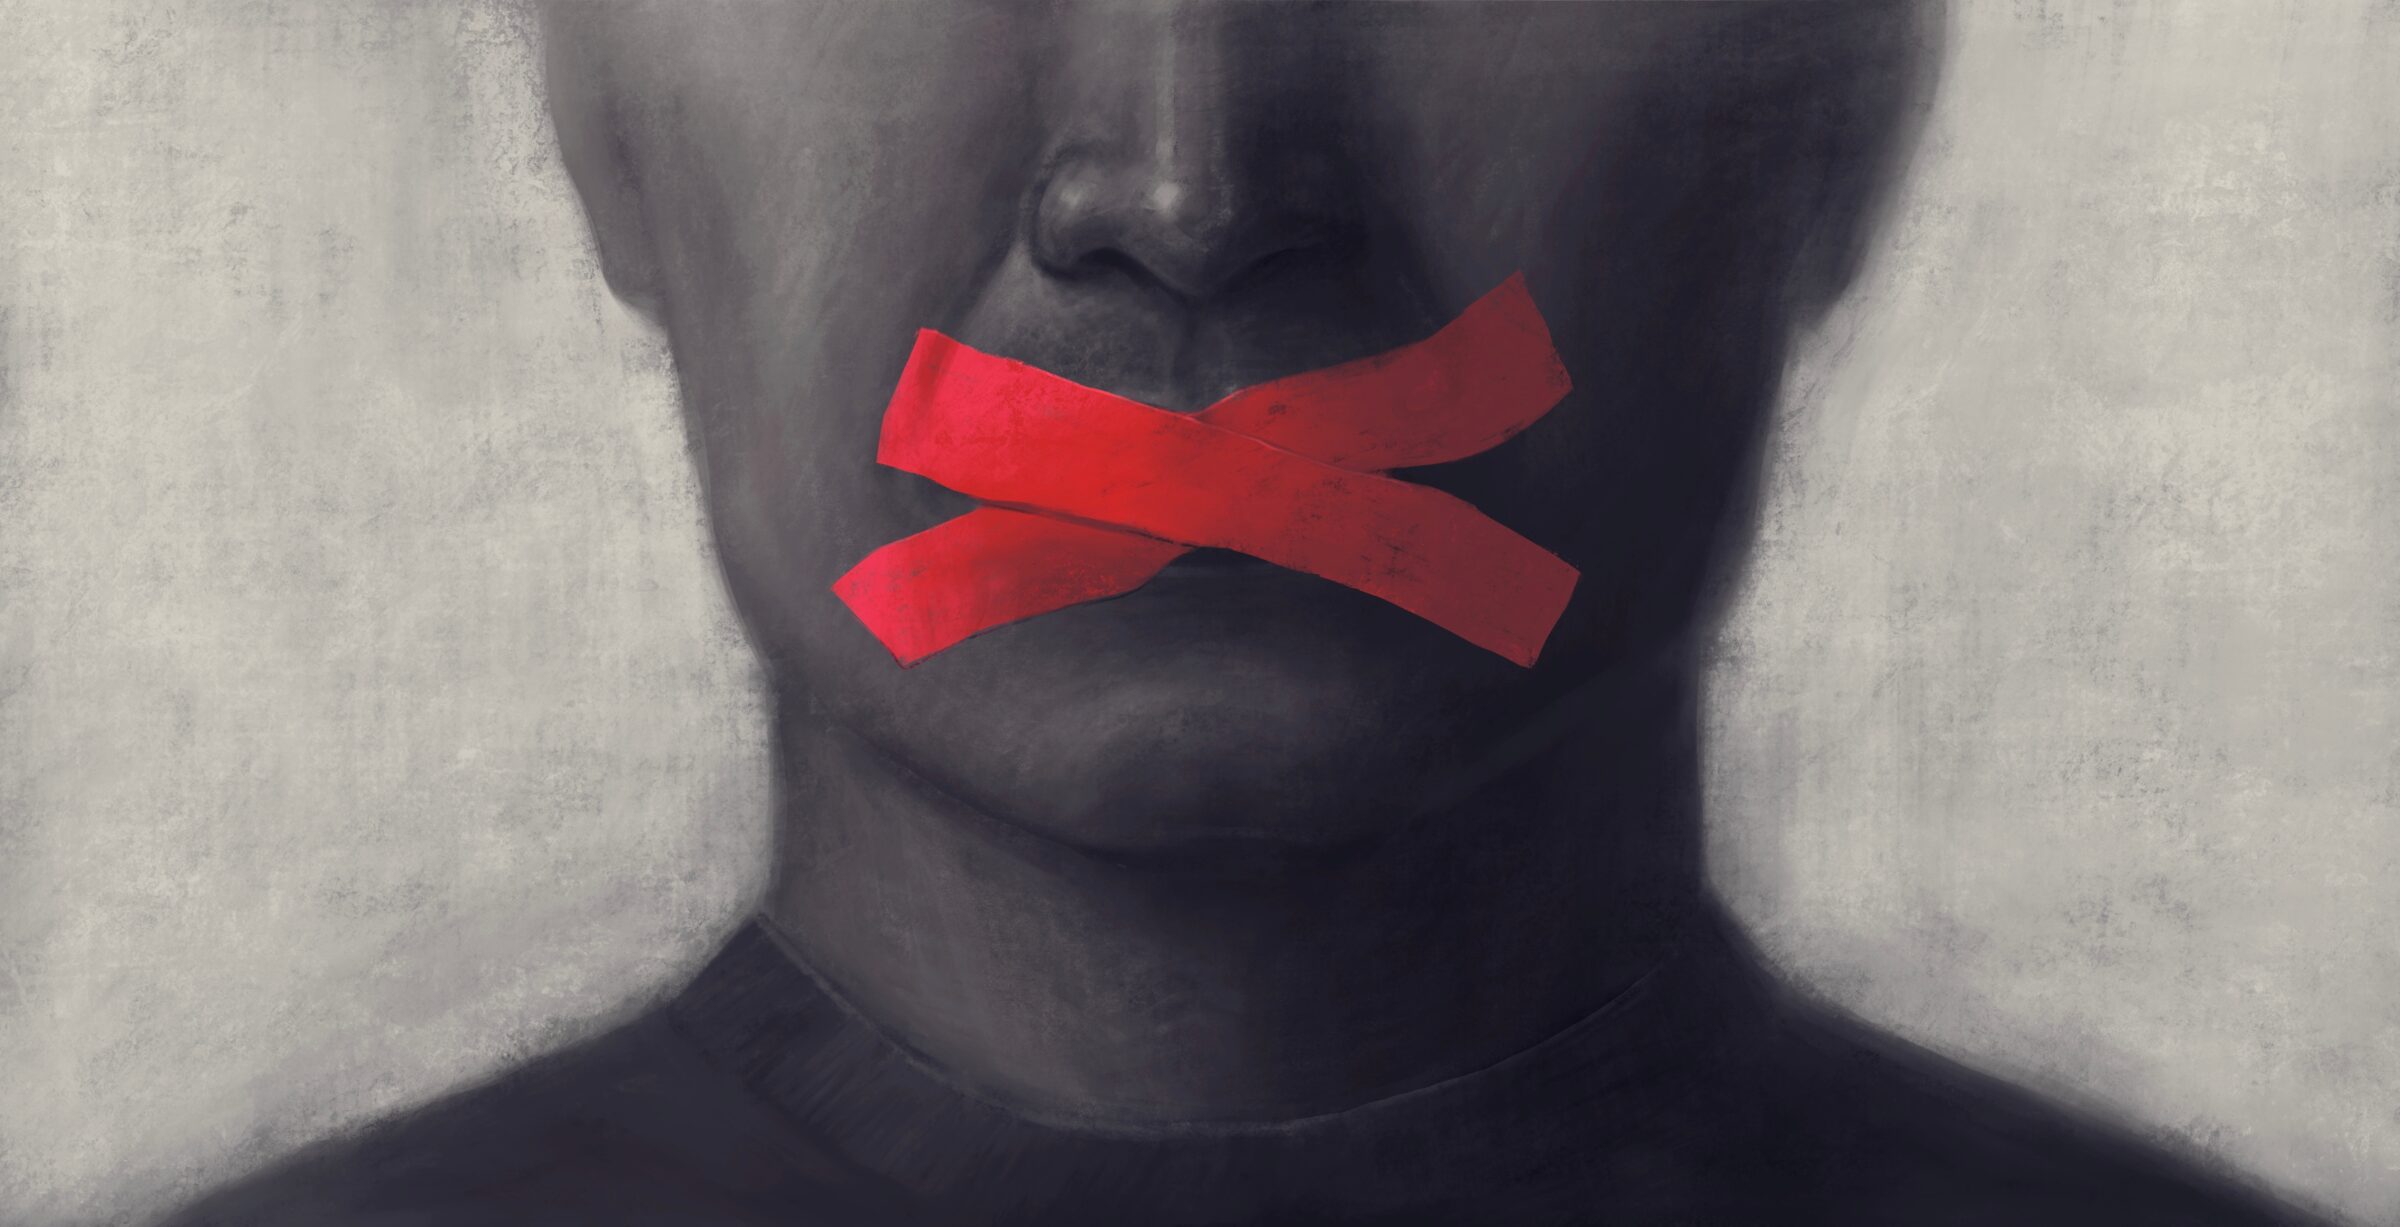 Concept idea of freedom speech freedom of expression and censored, surreal painting, portrait illustration, political art